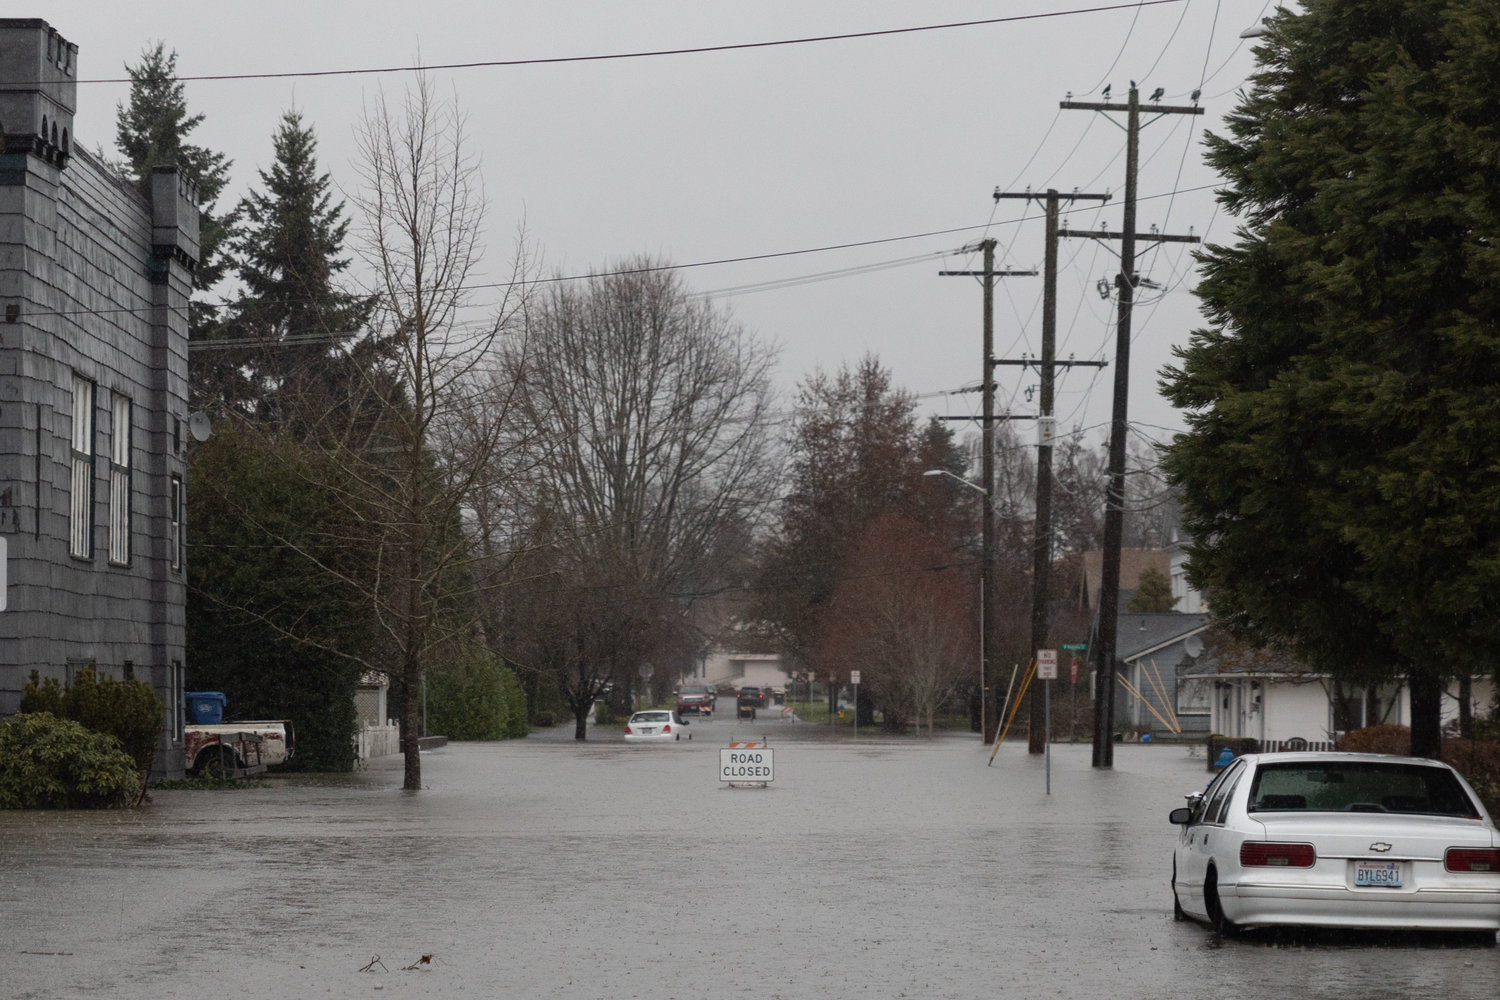 North Iron Street is covered in flooding waters at 1 p.m. on Thursday in Centralia.